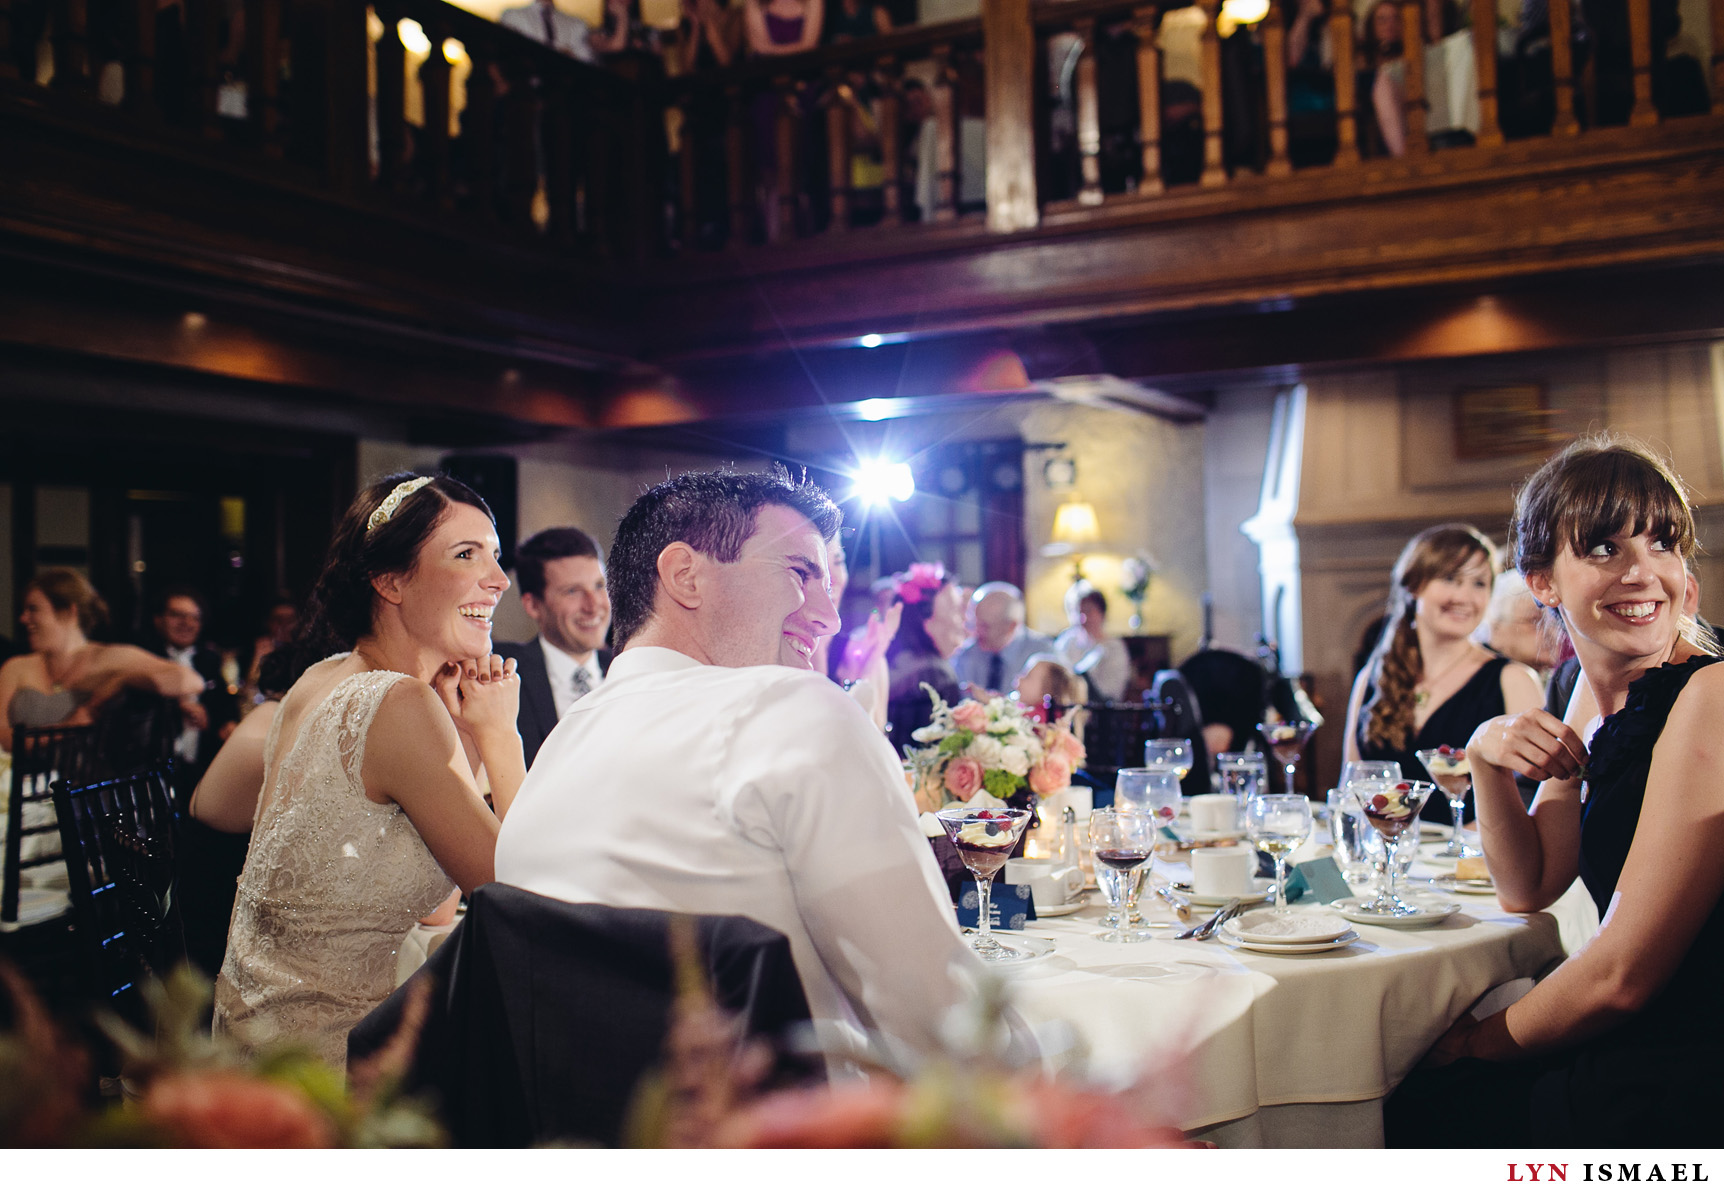 The bride and groom and their guests listen to speeches at the Windermere Manor wedding